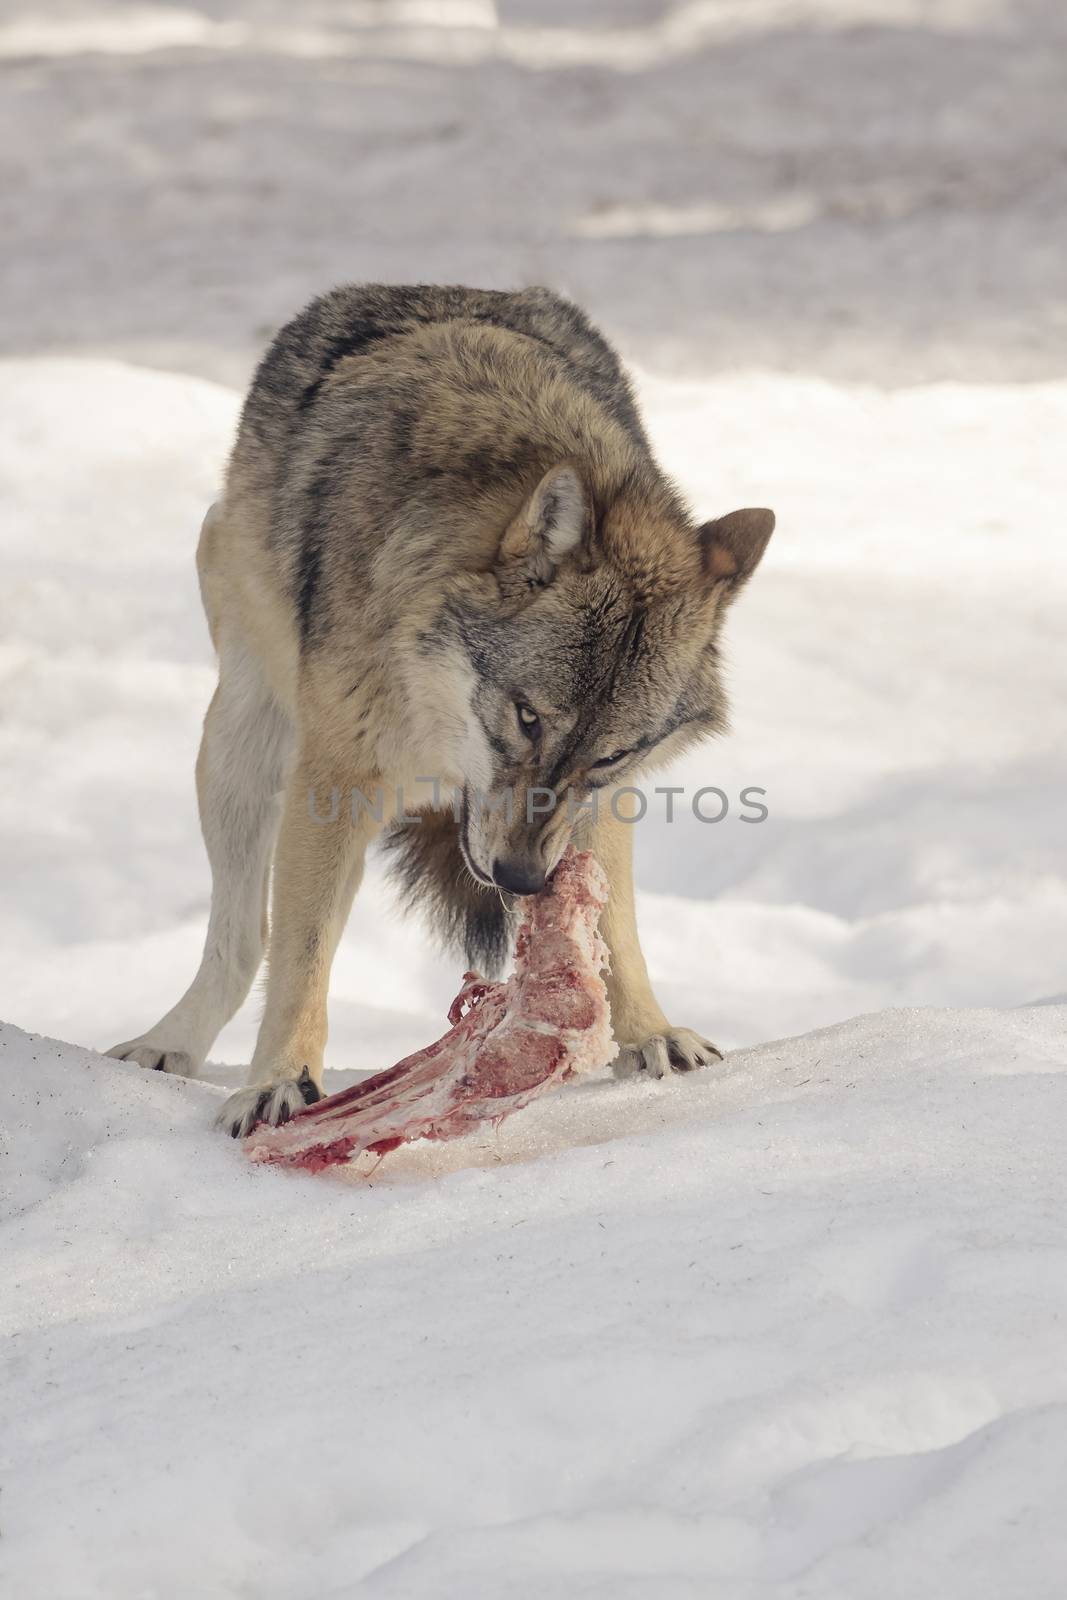 Wolf eats meat in the snow by sandra_fotodesign